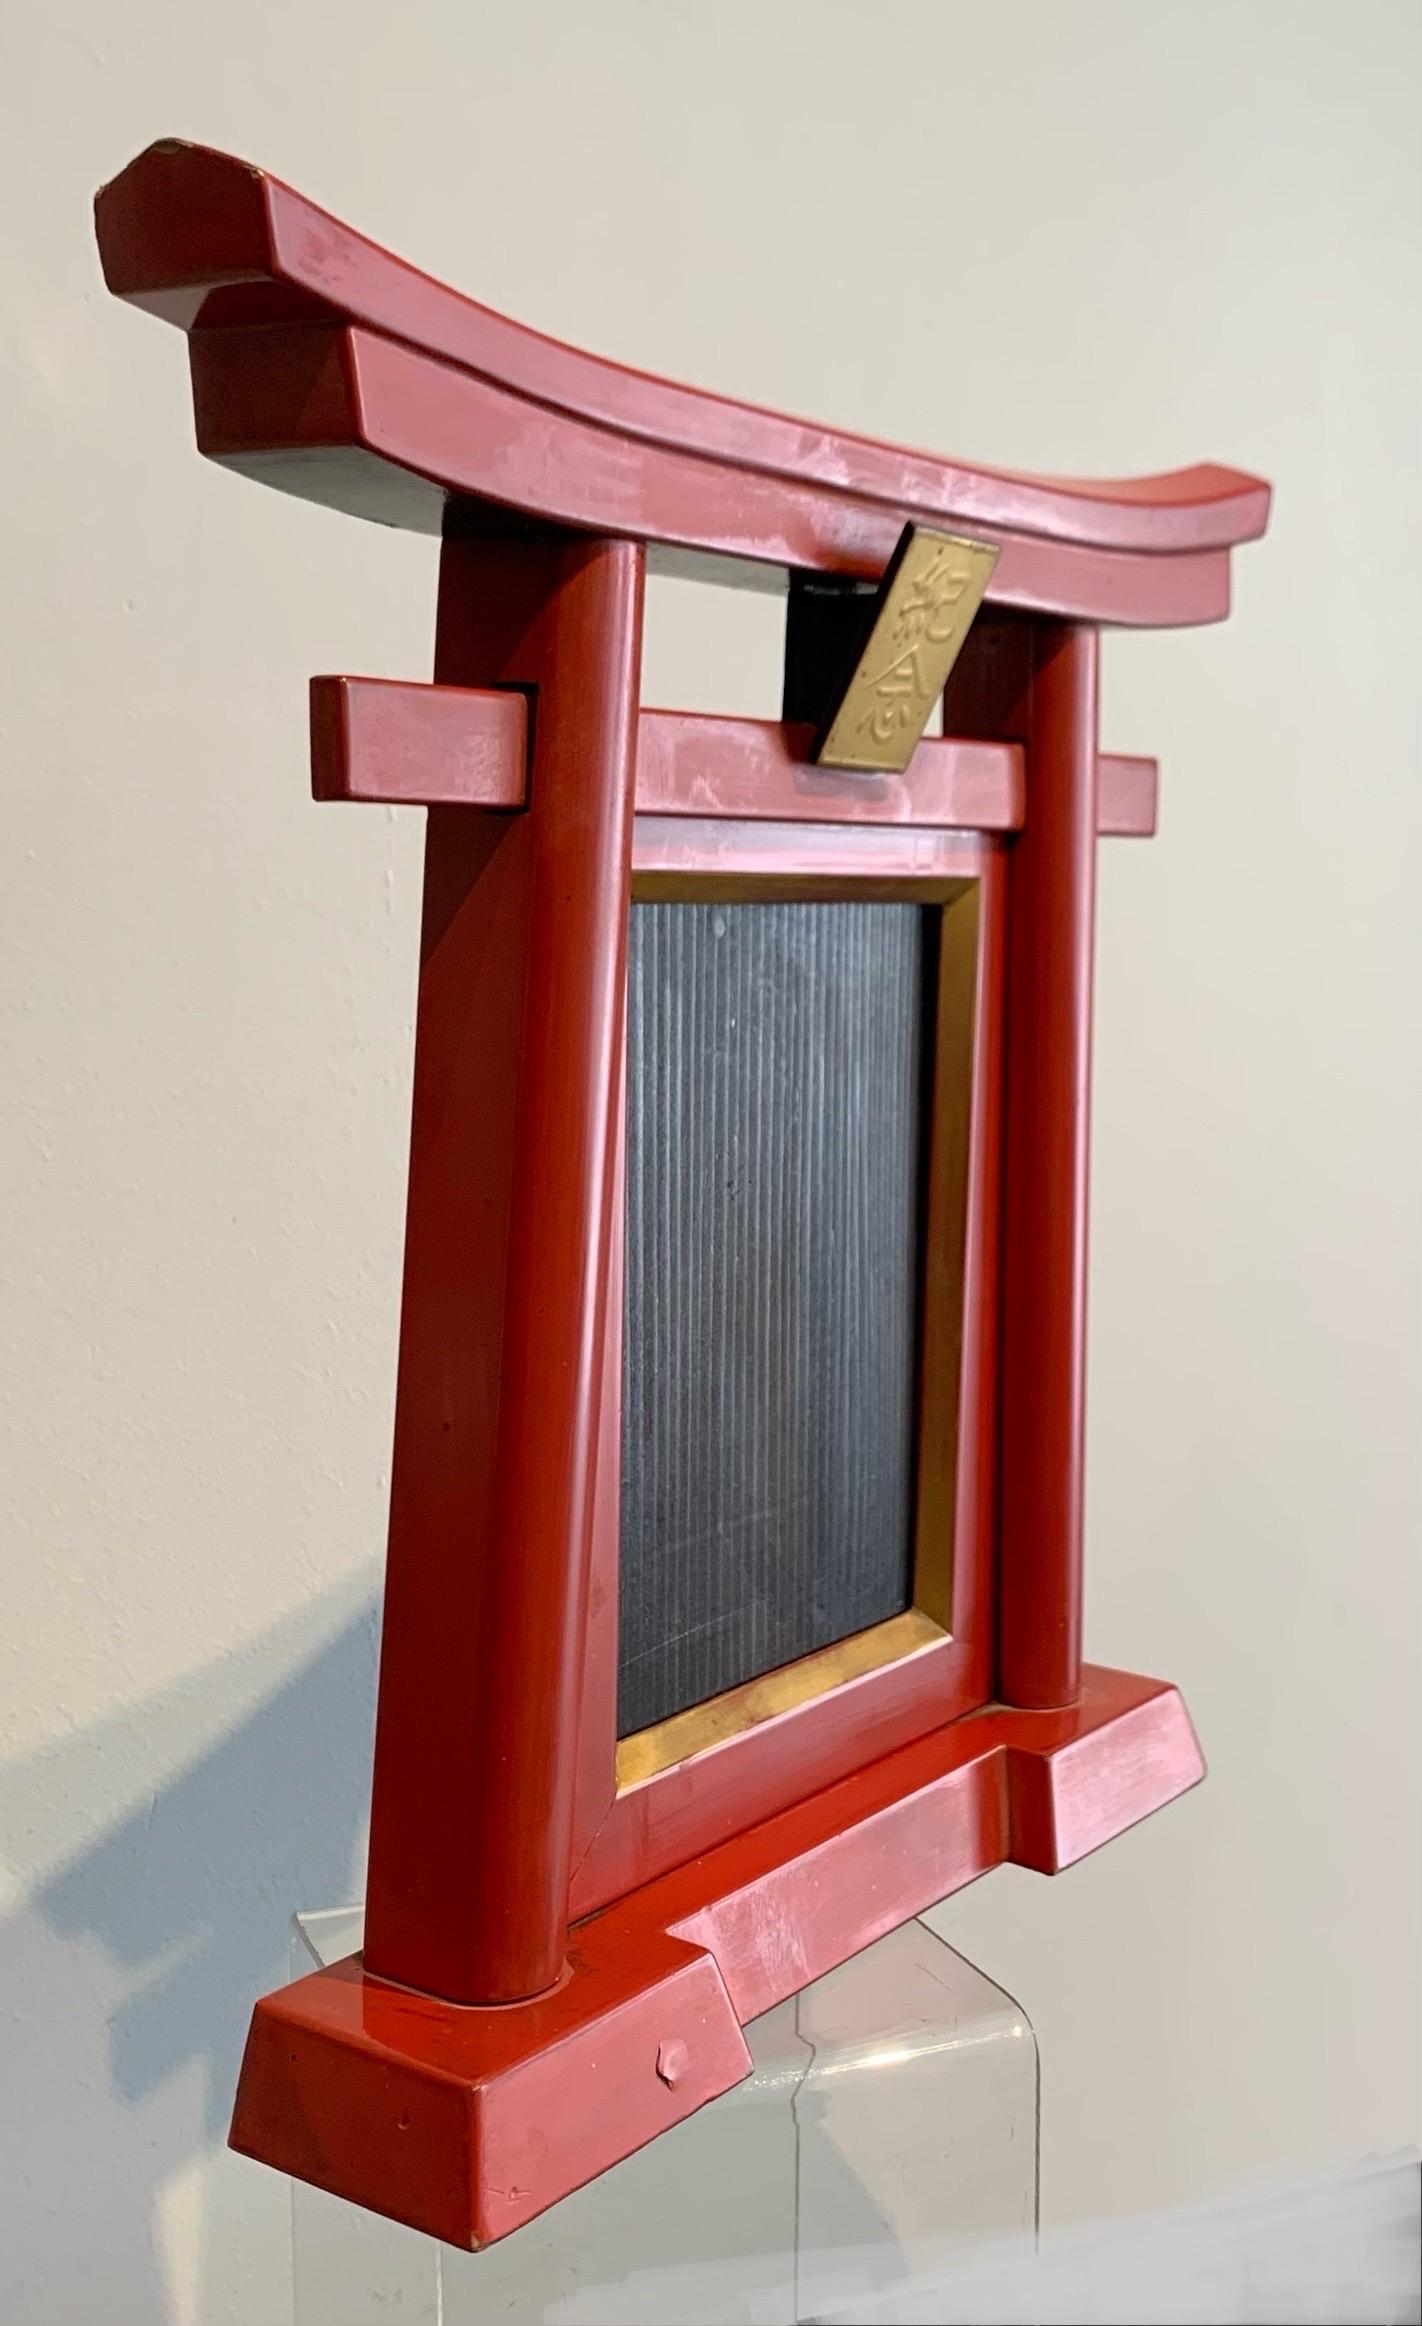 Red and black lacquered wooden frame, depicting a Japanese temple door. 
Torii gate with golden pediment.
Ideal format for photo (13.2 x 9.2 cm)
soft blackened bamboo bindings on the back